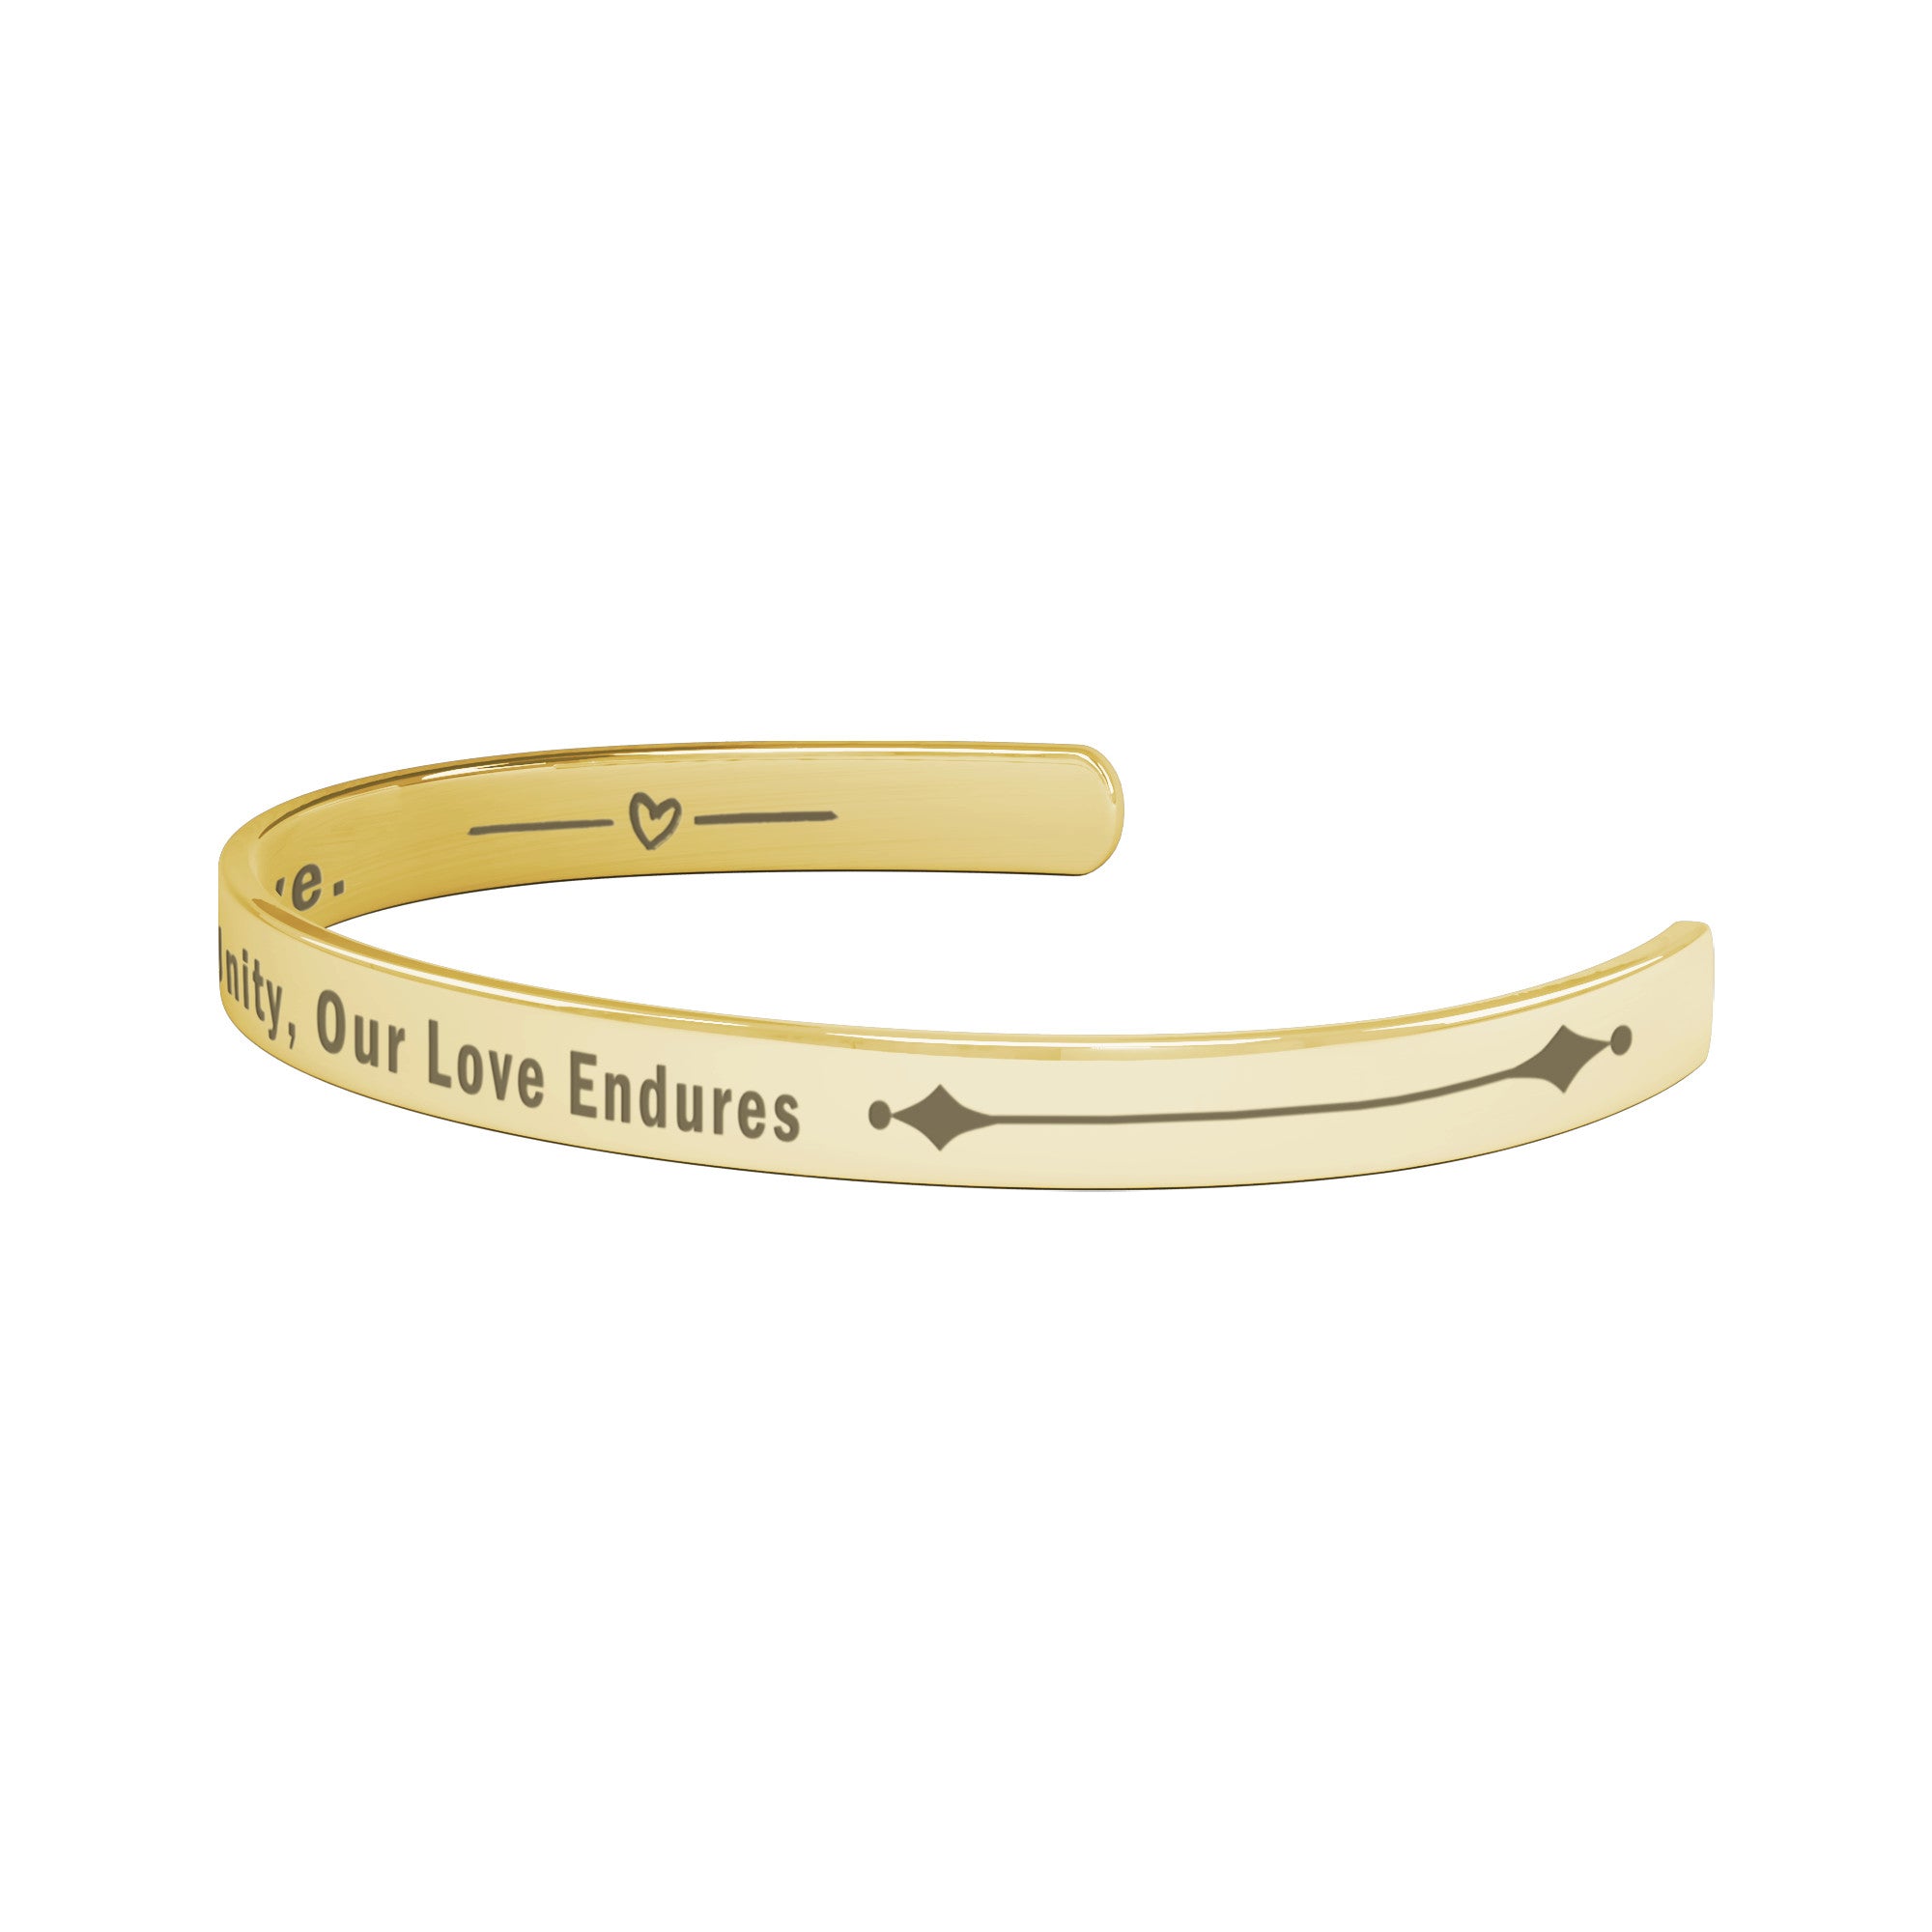 In Unity. Our Love Endures Cuff Bracelet